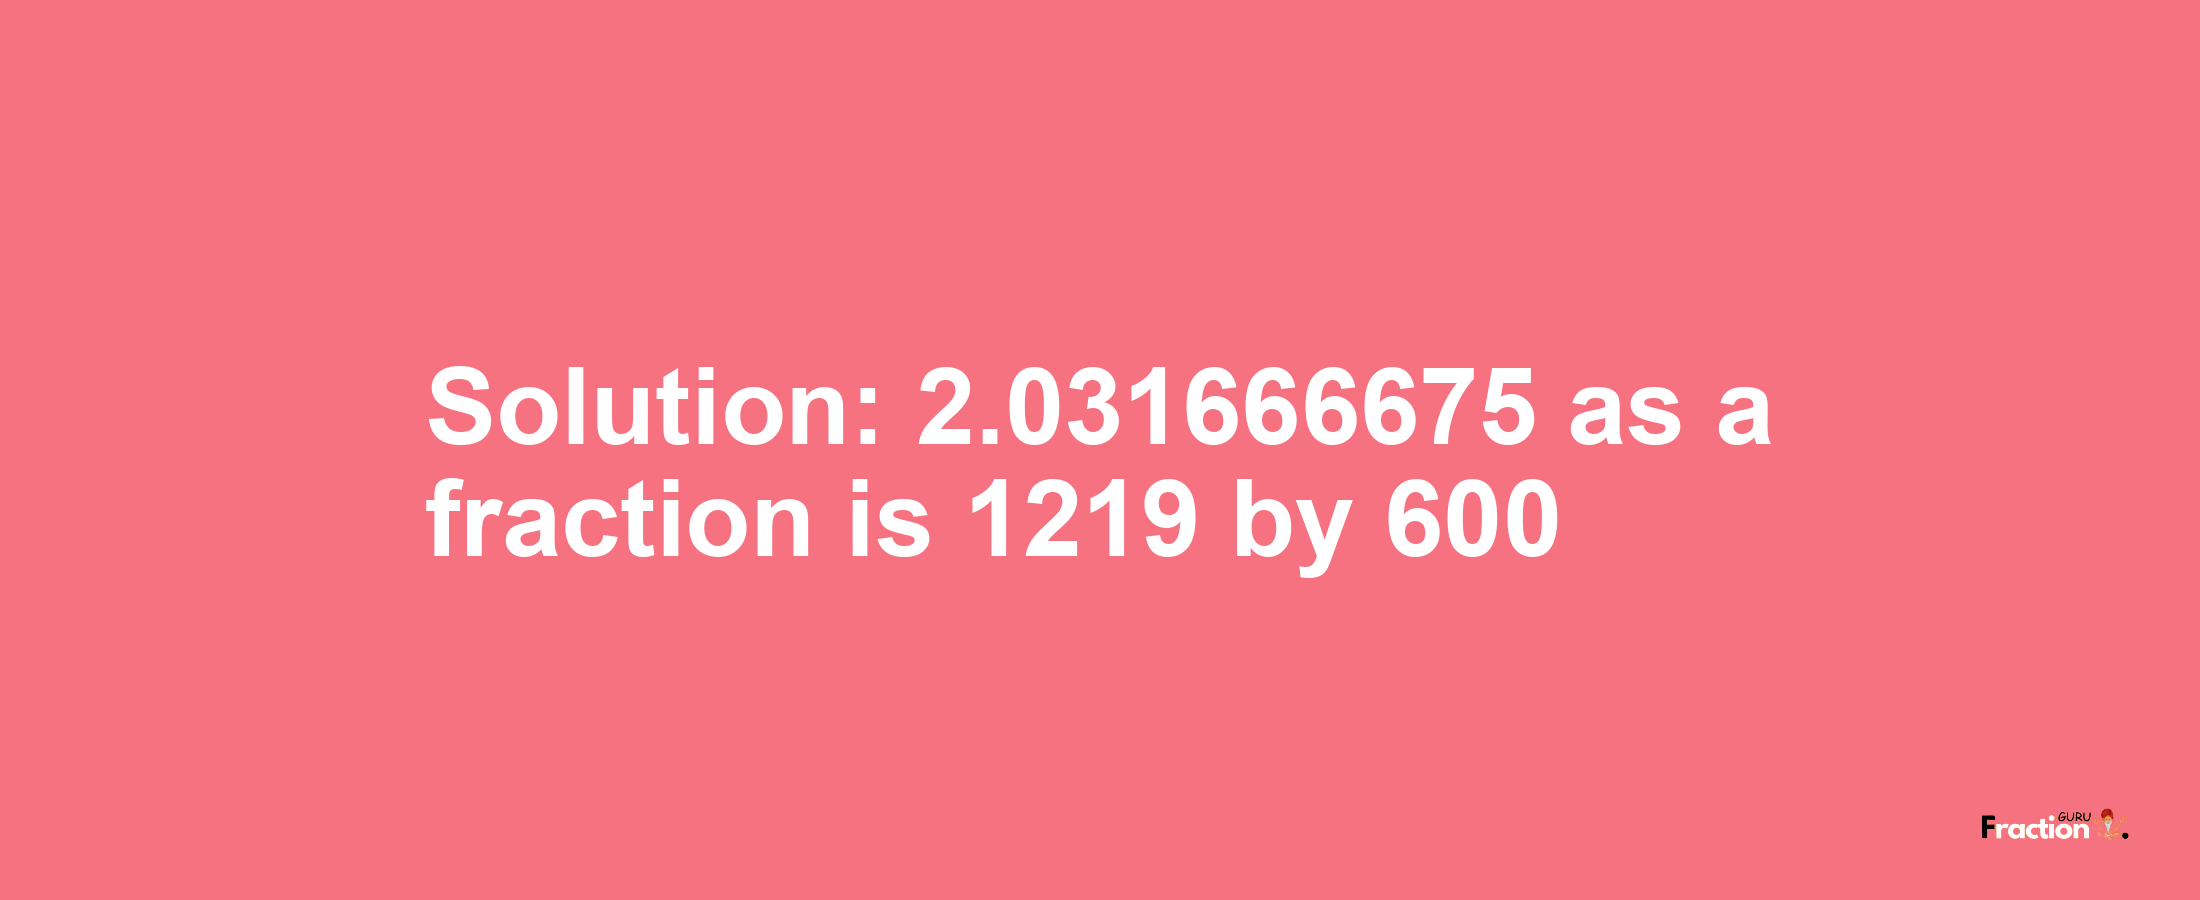 Solution:2.031666675 as a fraction is 1219/600